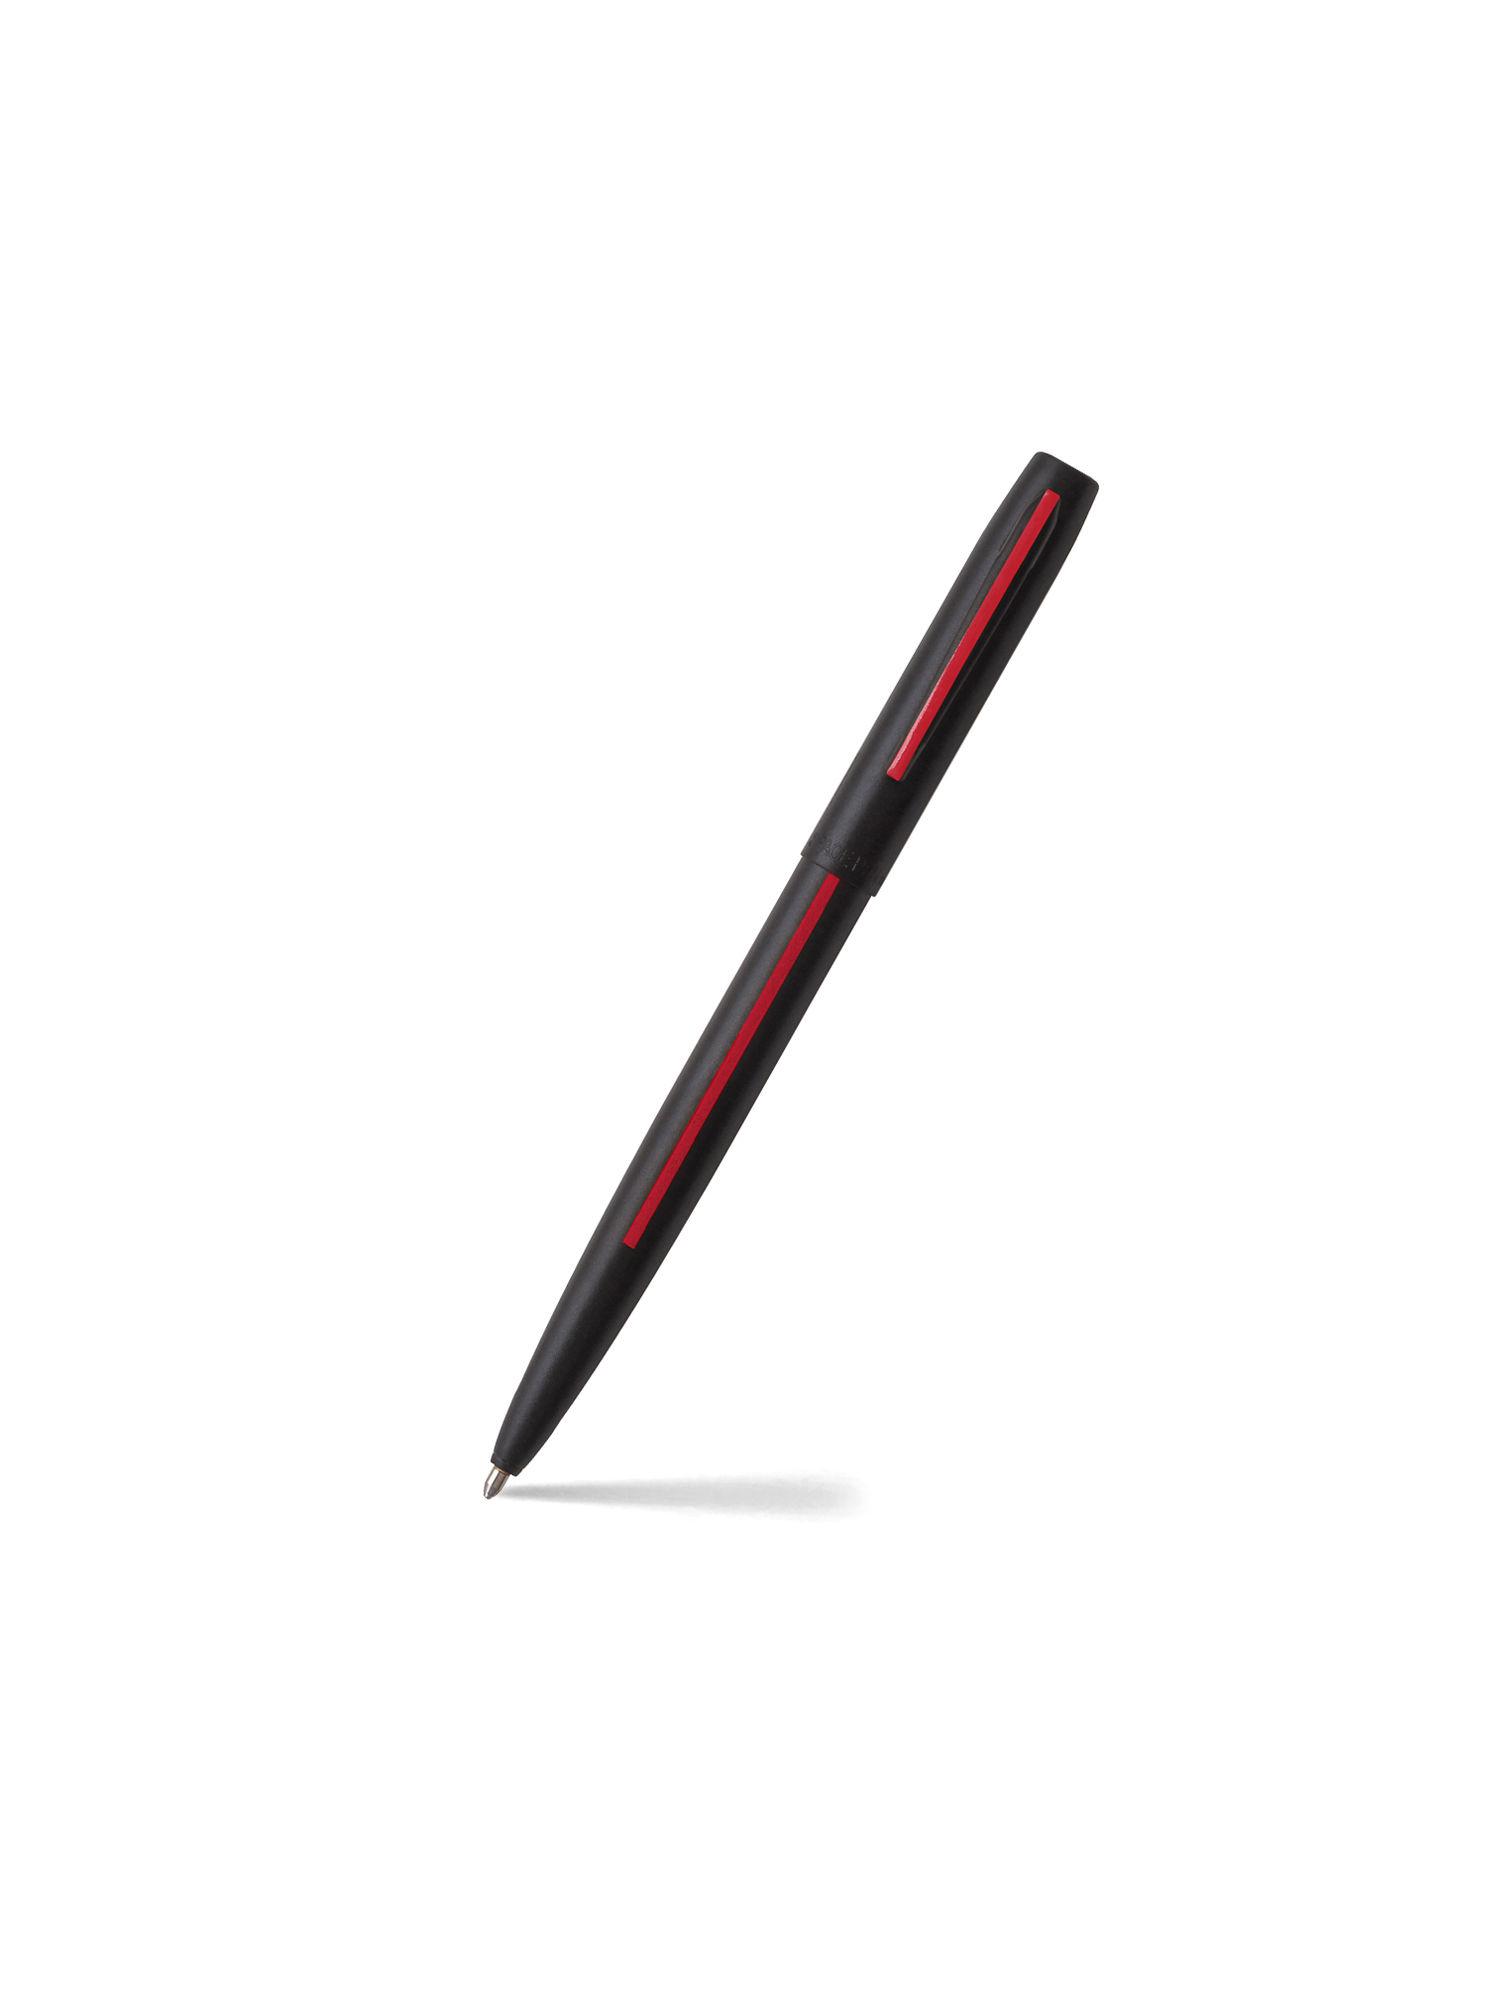 non-reflective conservation cap-o-matic ballpoint pen - matte black and red